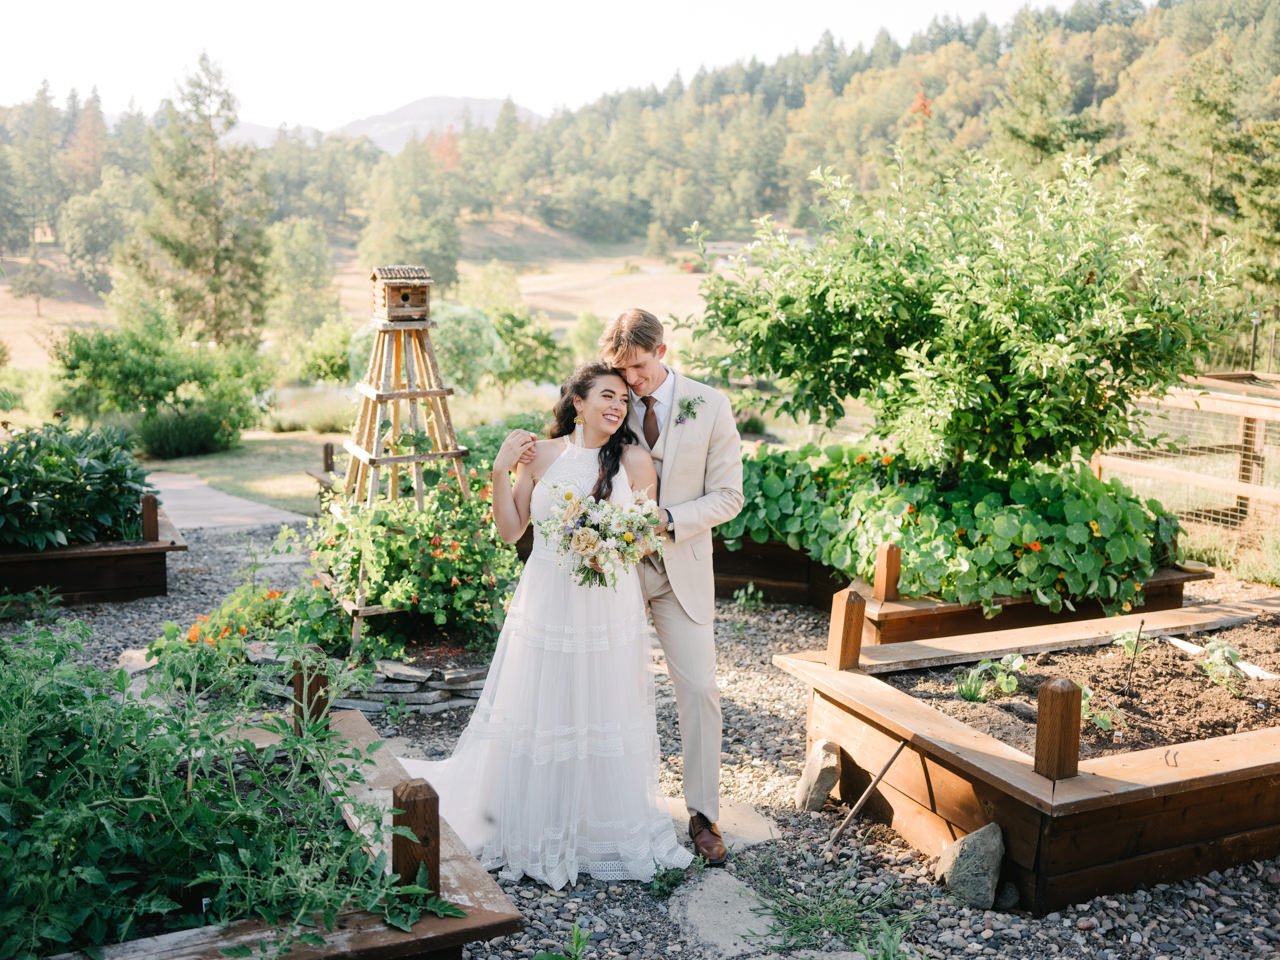  Bride and groom standing together in garden of raised beds and birdhouse with southern Oregon valley in background 